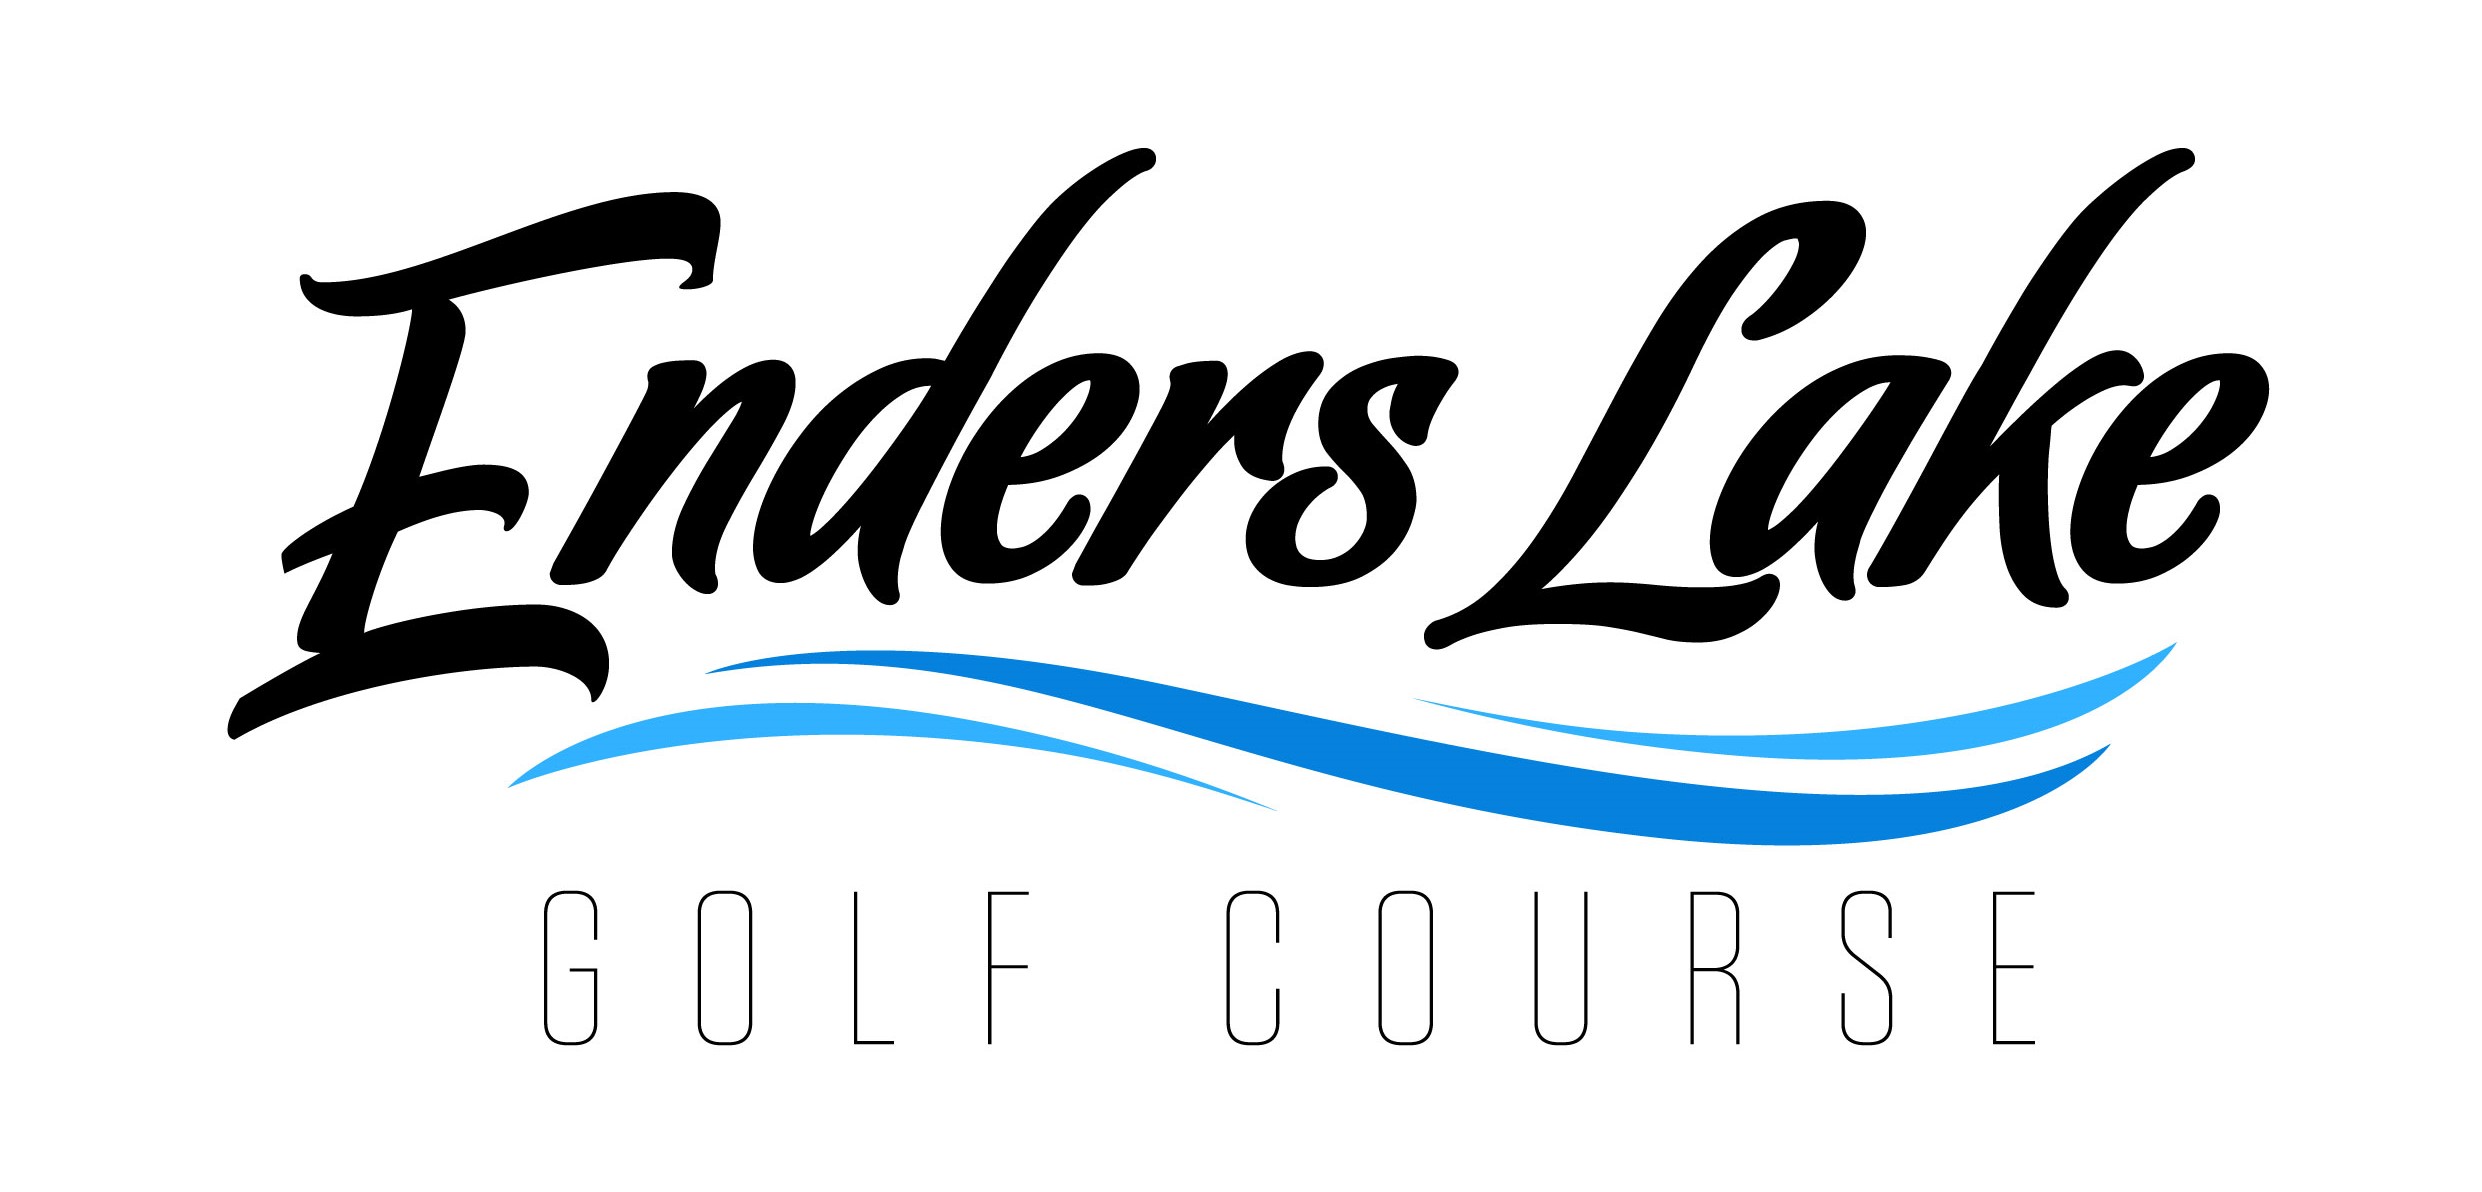 Enders Lake Golf Course